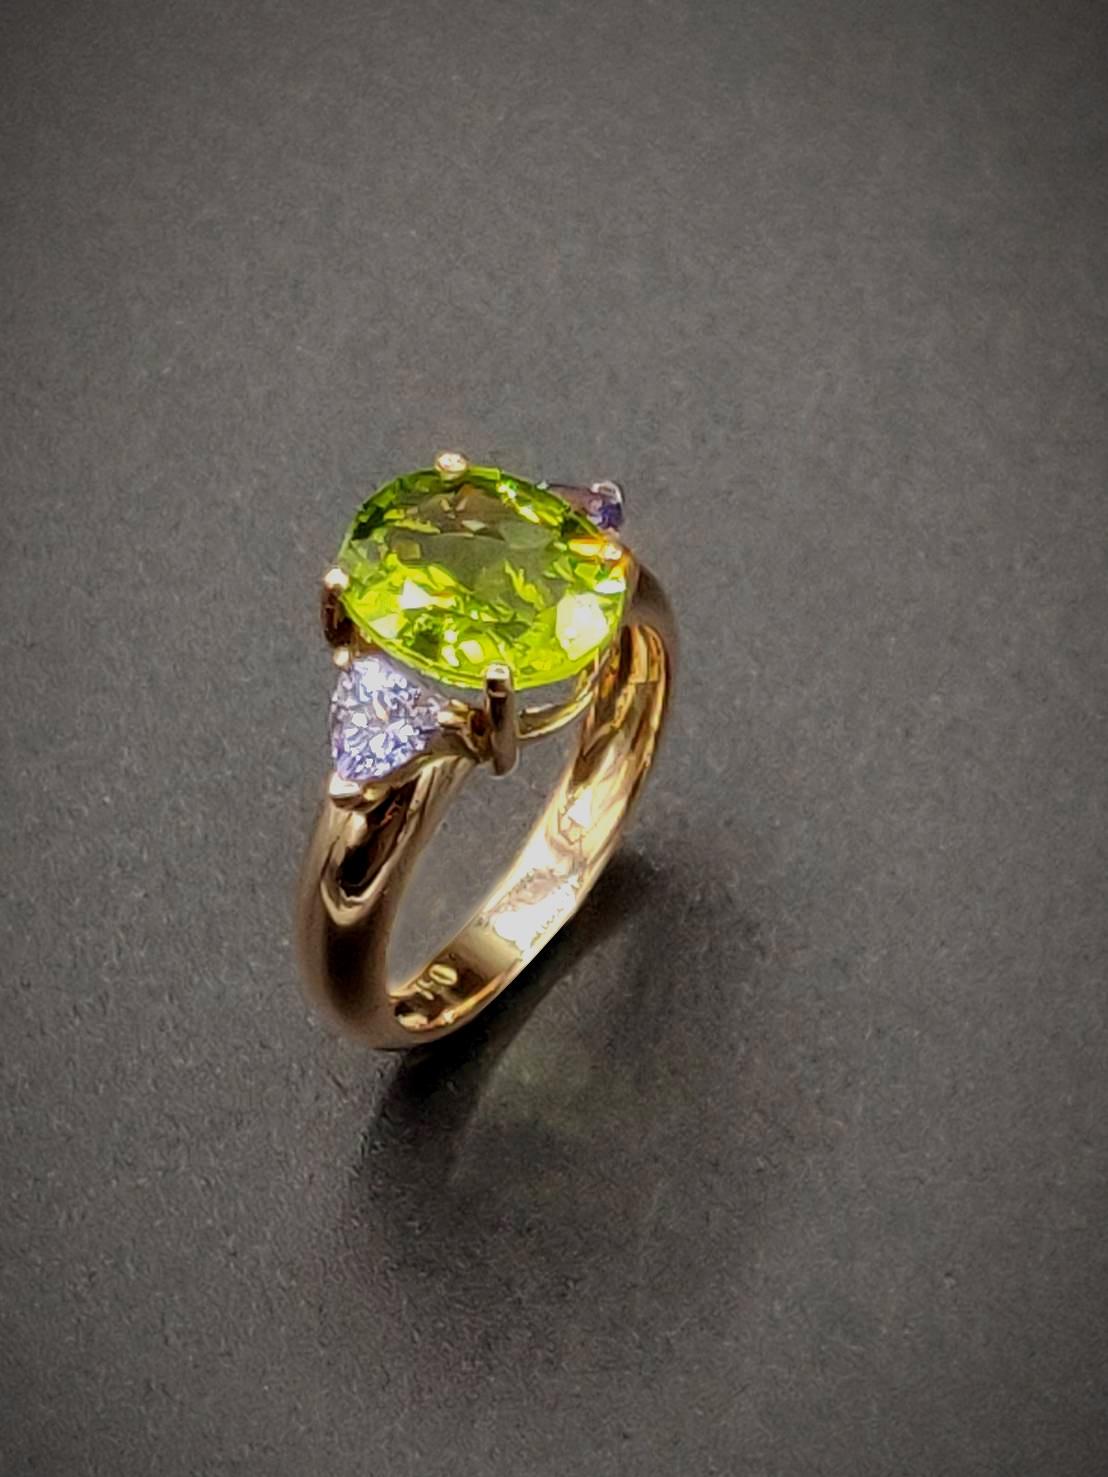 This simple three-stone 18K rose gold ring flaunts a 3.81ct good-sized oval vivid young leaf green peridot flattered by trillion light cornflower blue tanzanites on the flanks

Gold: 18K Rose Gold, 5.42 g
Peridot: Oval, 3.81 ct
Tanzanite: Trillion,